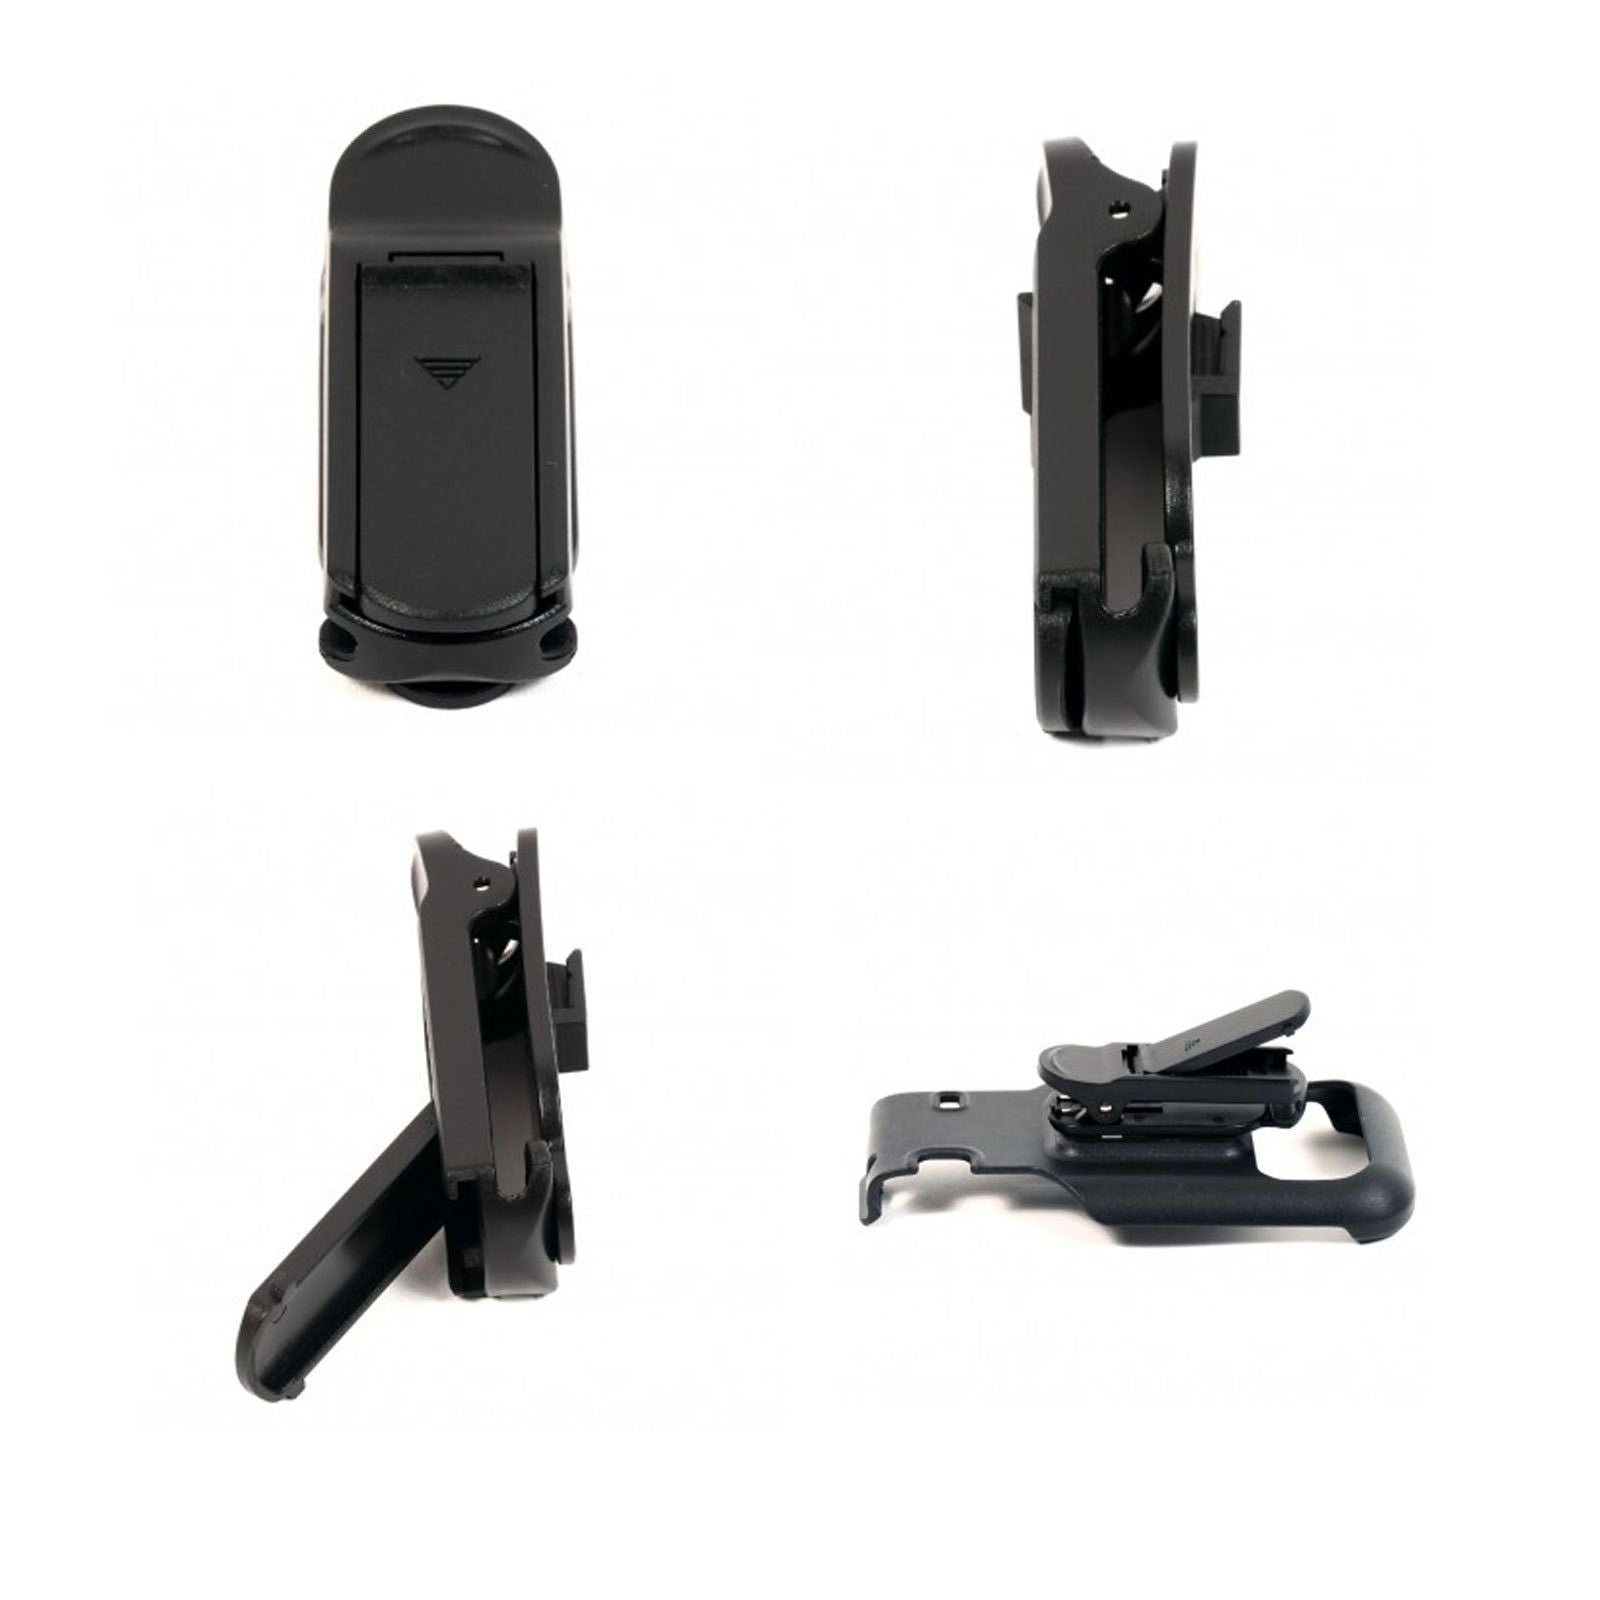 Ultimateaddons Golf Bag Clip Attachment for Holders and Cases - Ultimateaddons